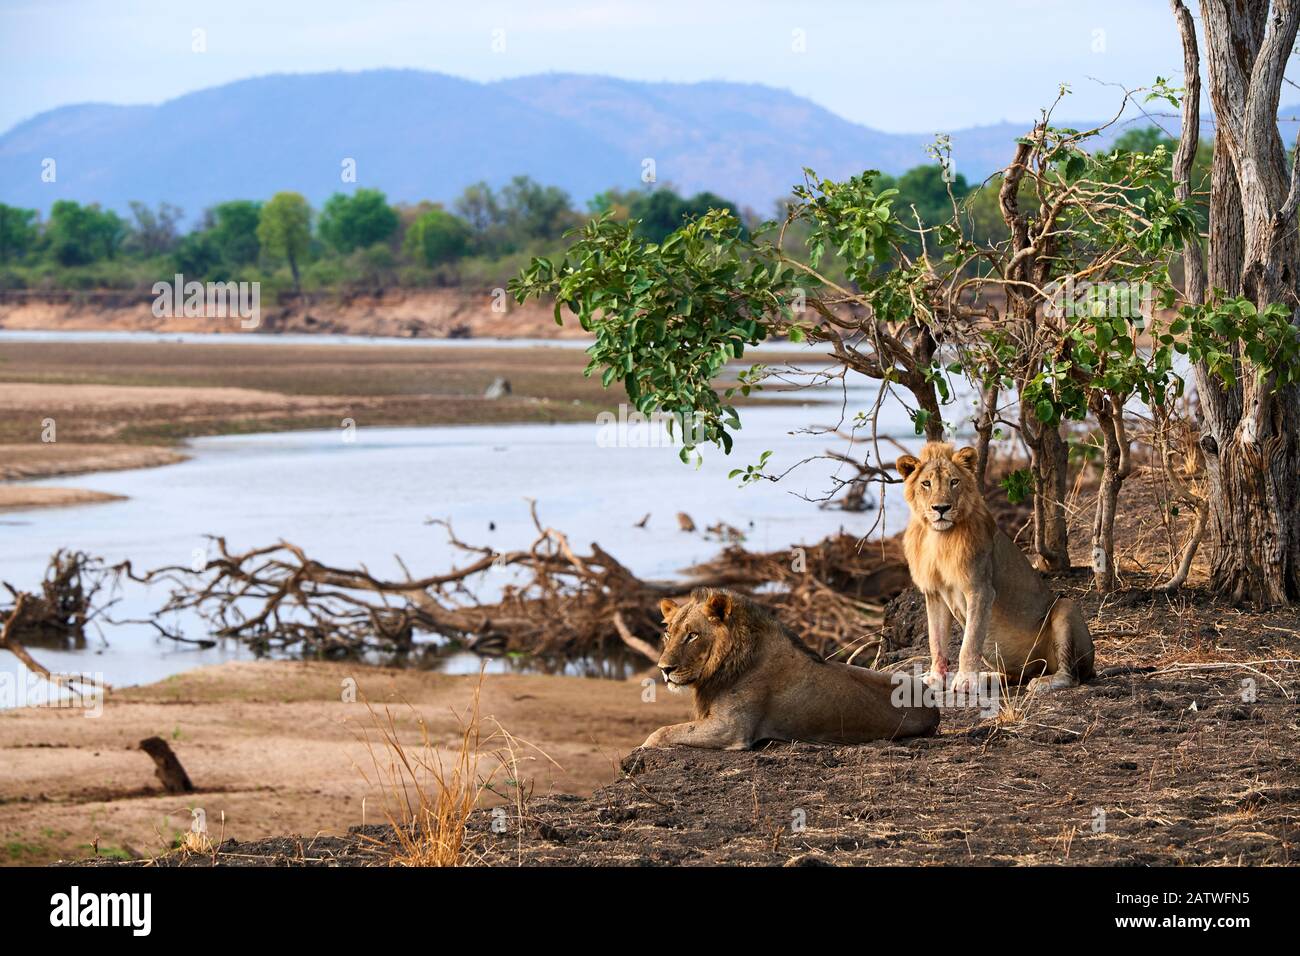 Coalition of two African male lions (Panthera leo) resting on the banks of the Luangwa river, dry season, South Luangwa National Park, Zambia Stock Photo